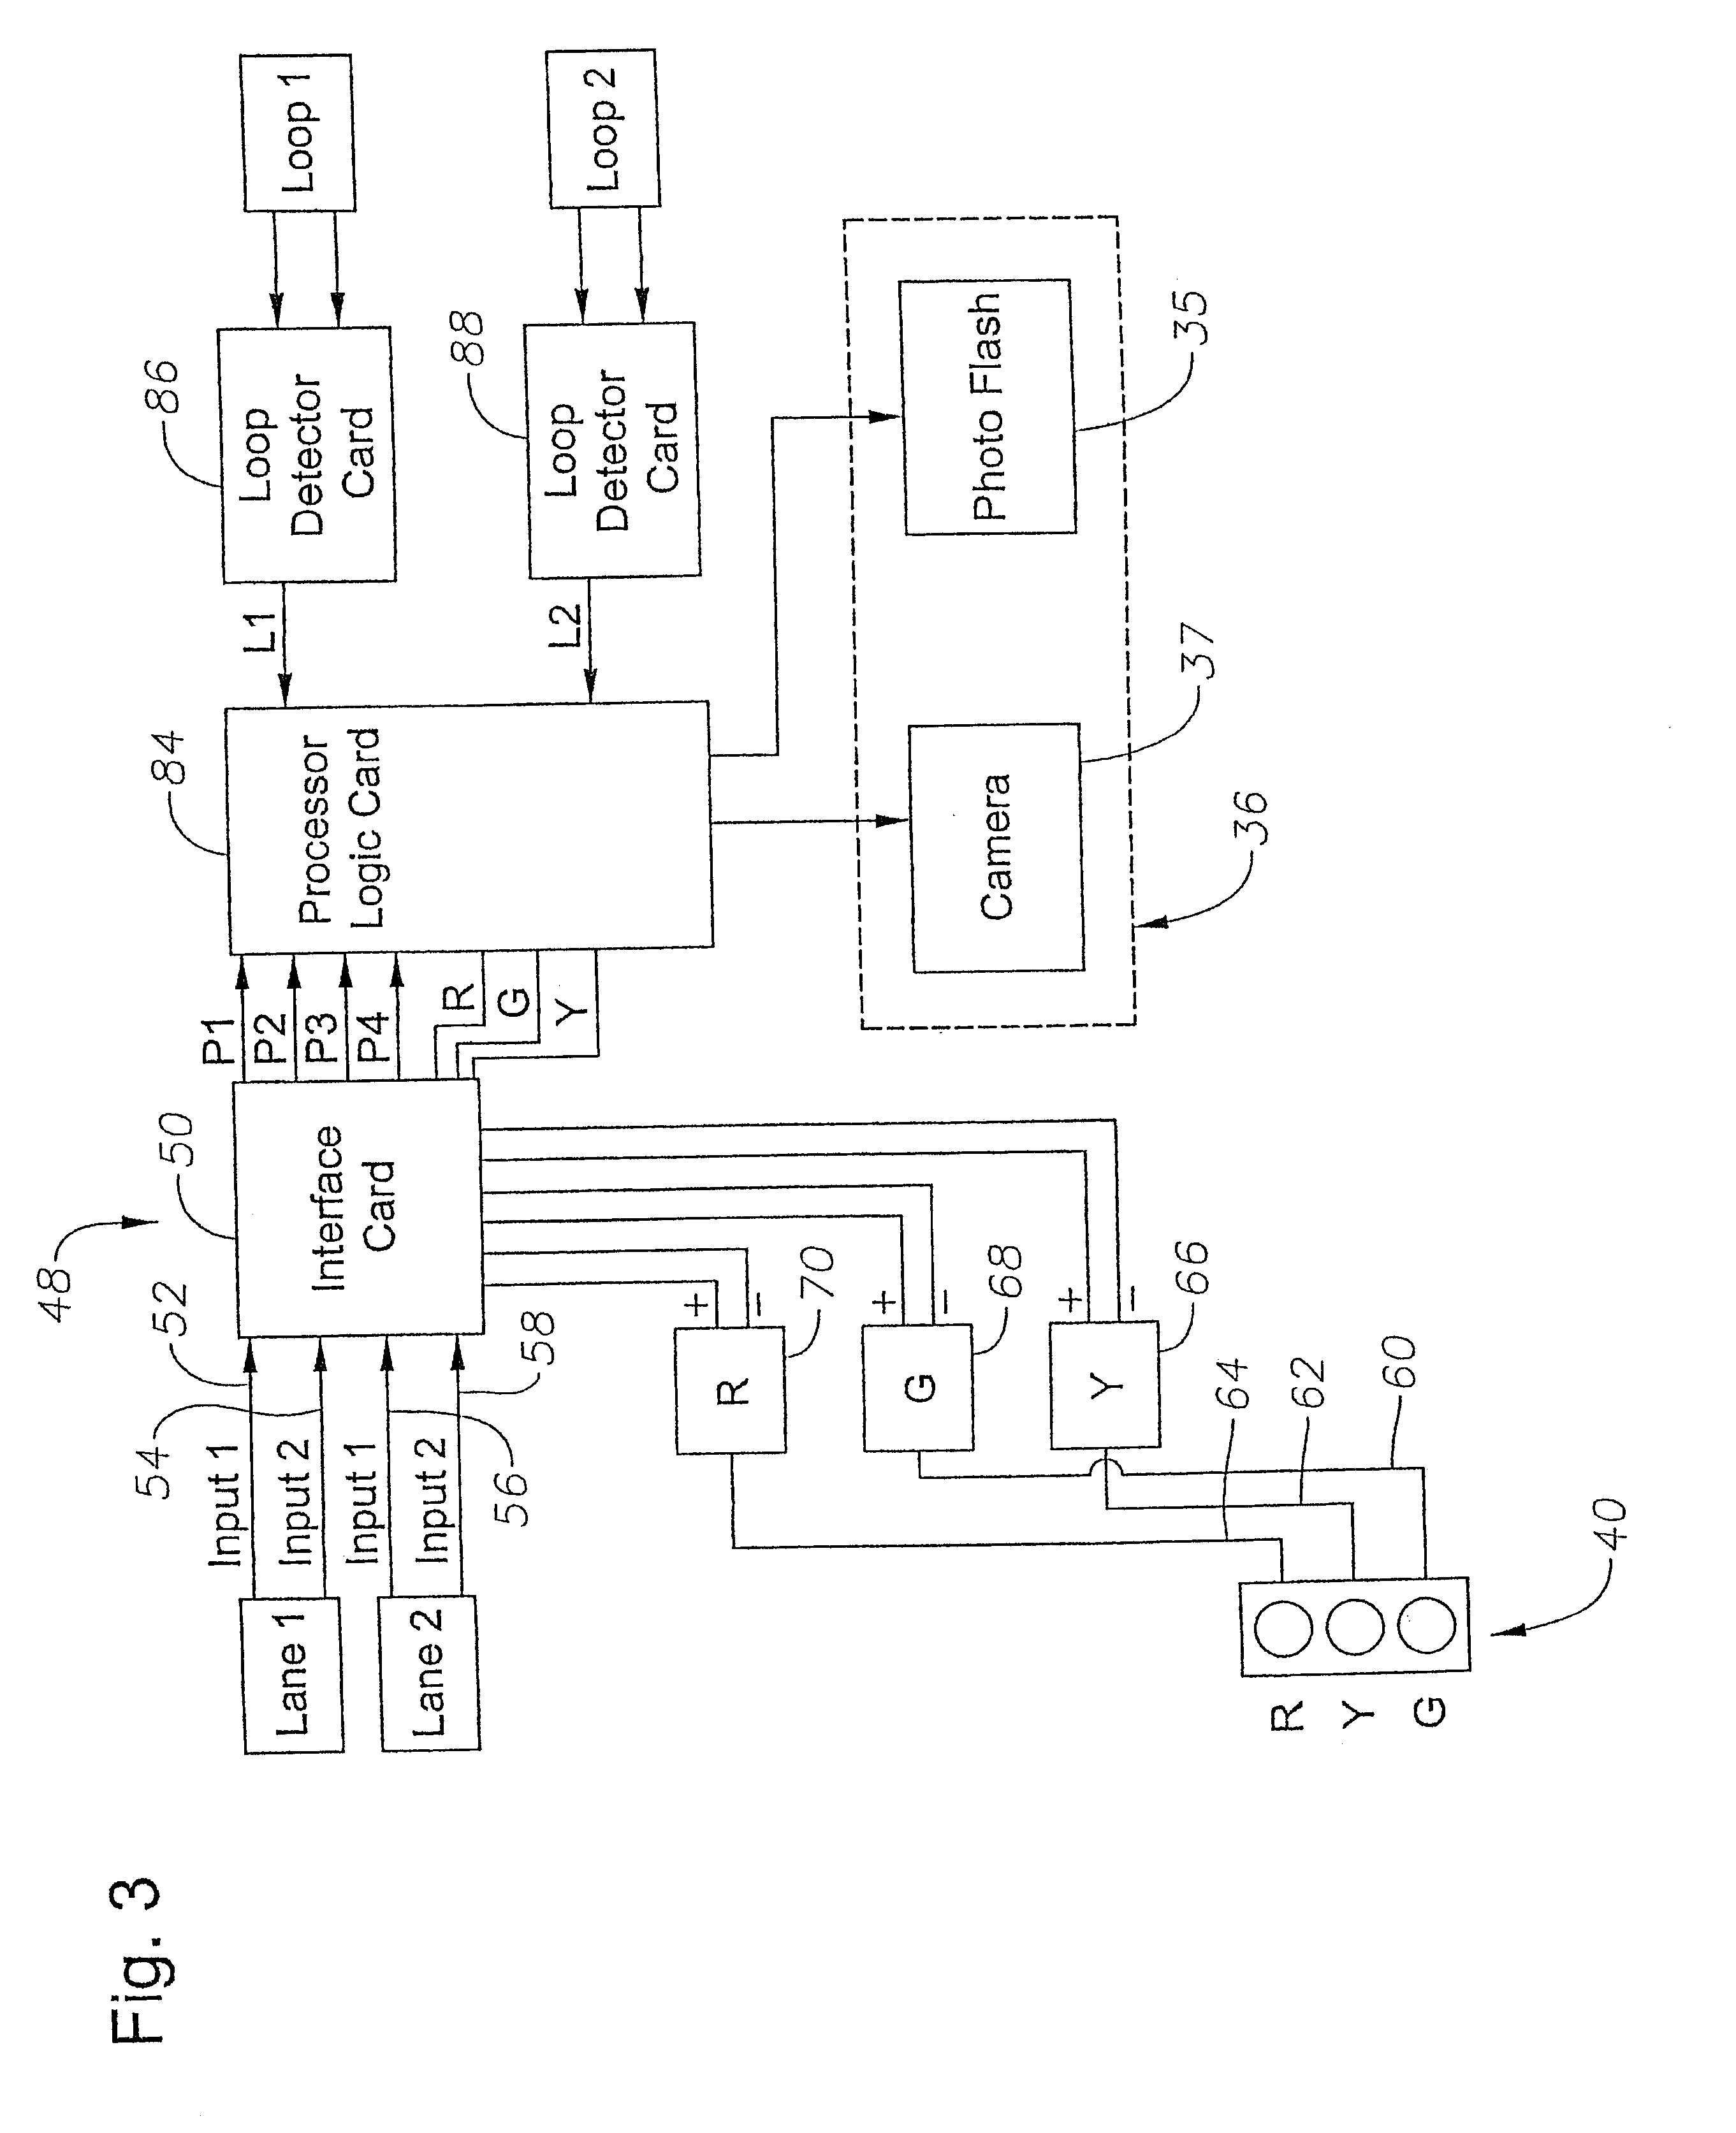 Method and apparatus for photographing traffic in an intersection